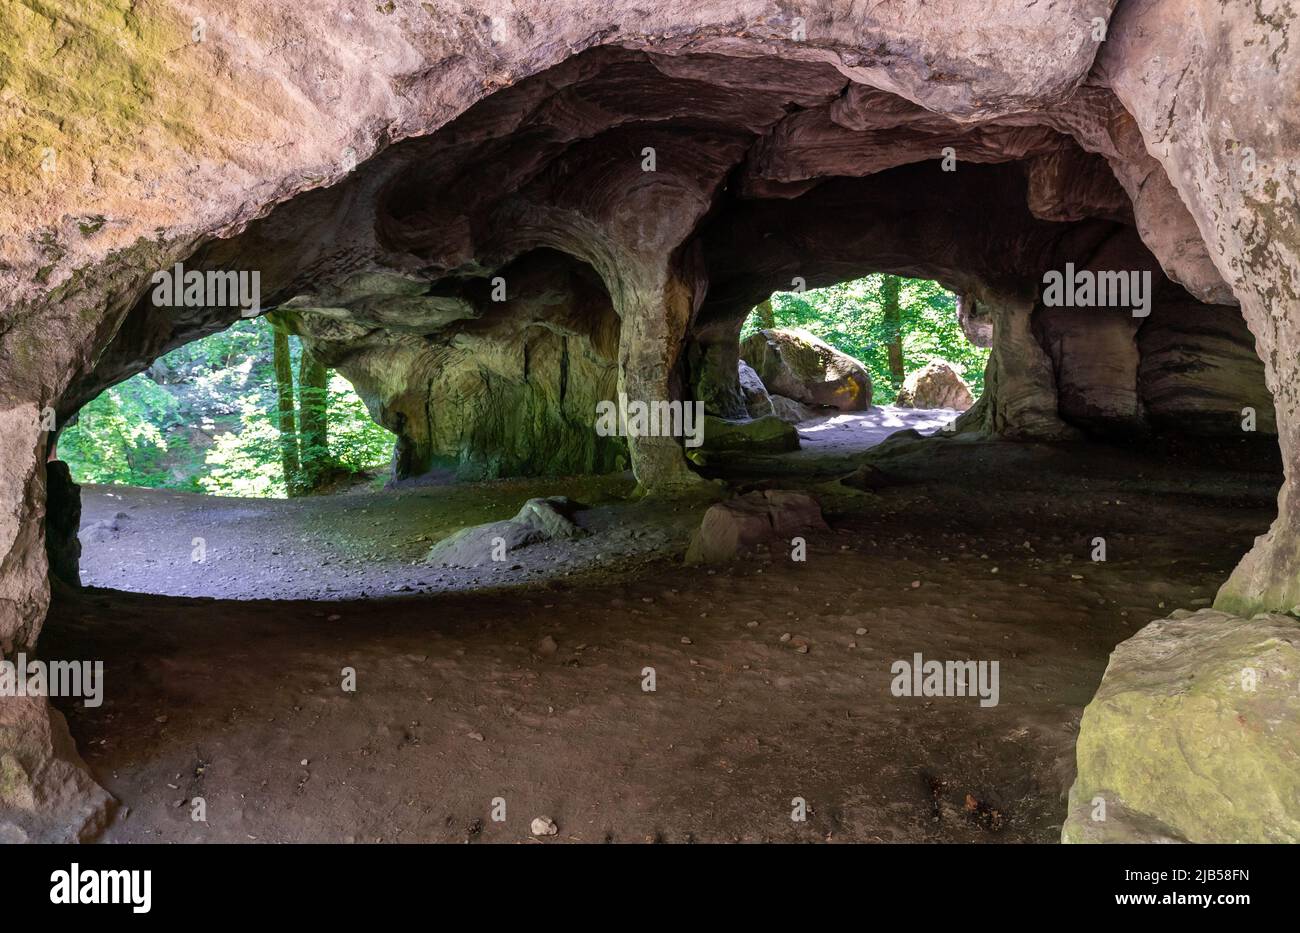 A view of the historic Hohllay Roman cave used for making millstones in the Mullerthal region of Luxembourg Stock Photo